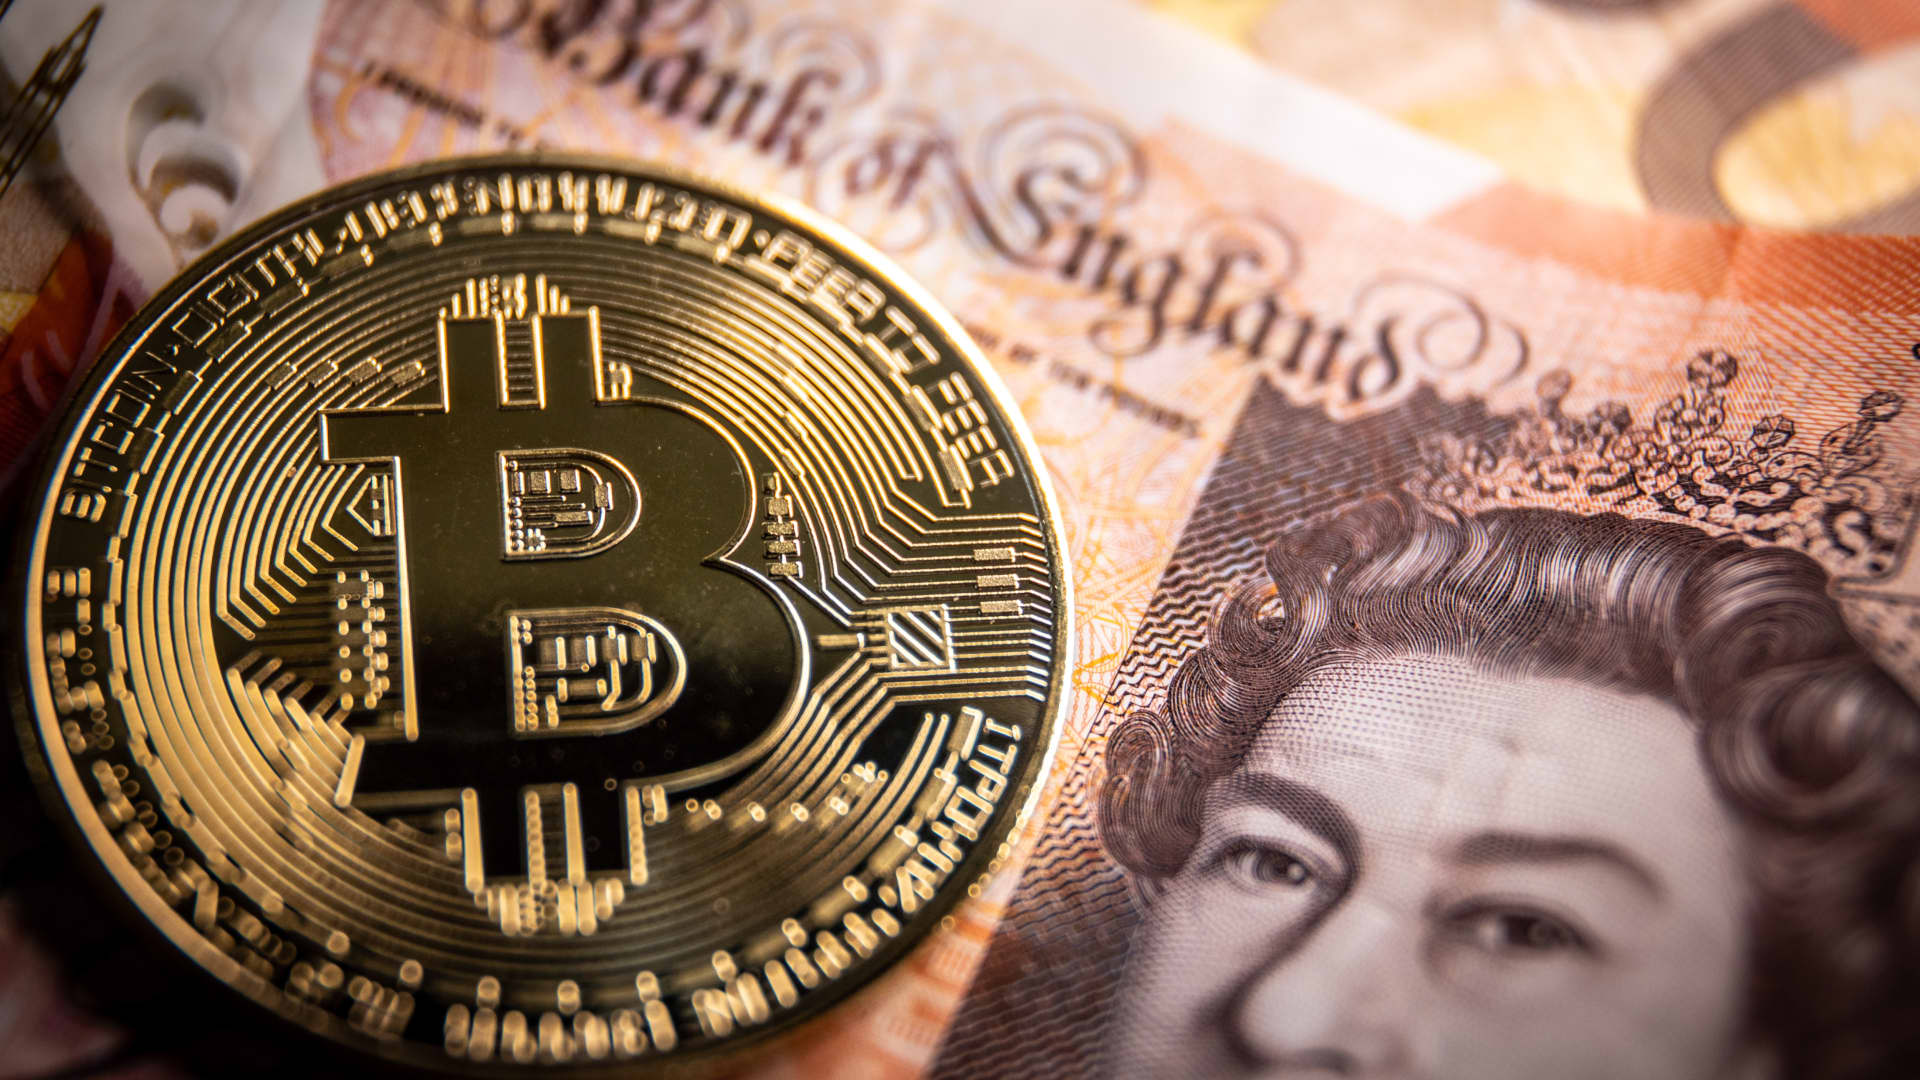 Crypto firms face being booted from UK as FCA register deadline nears